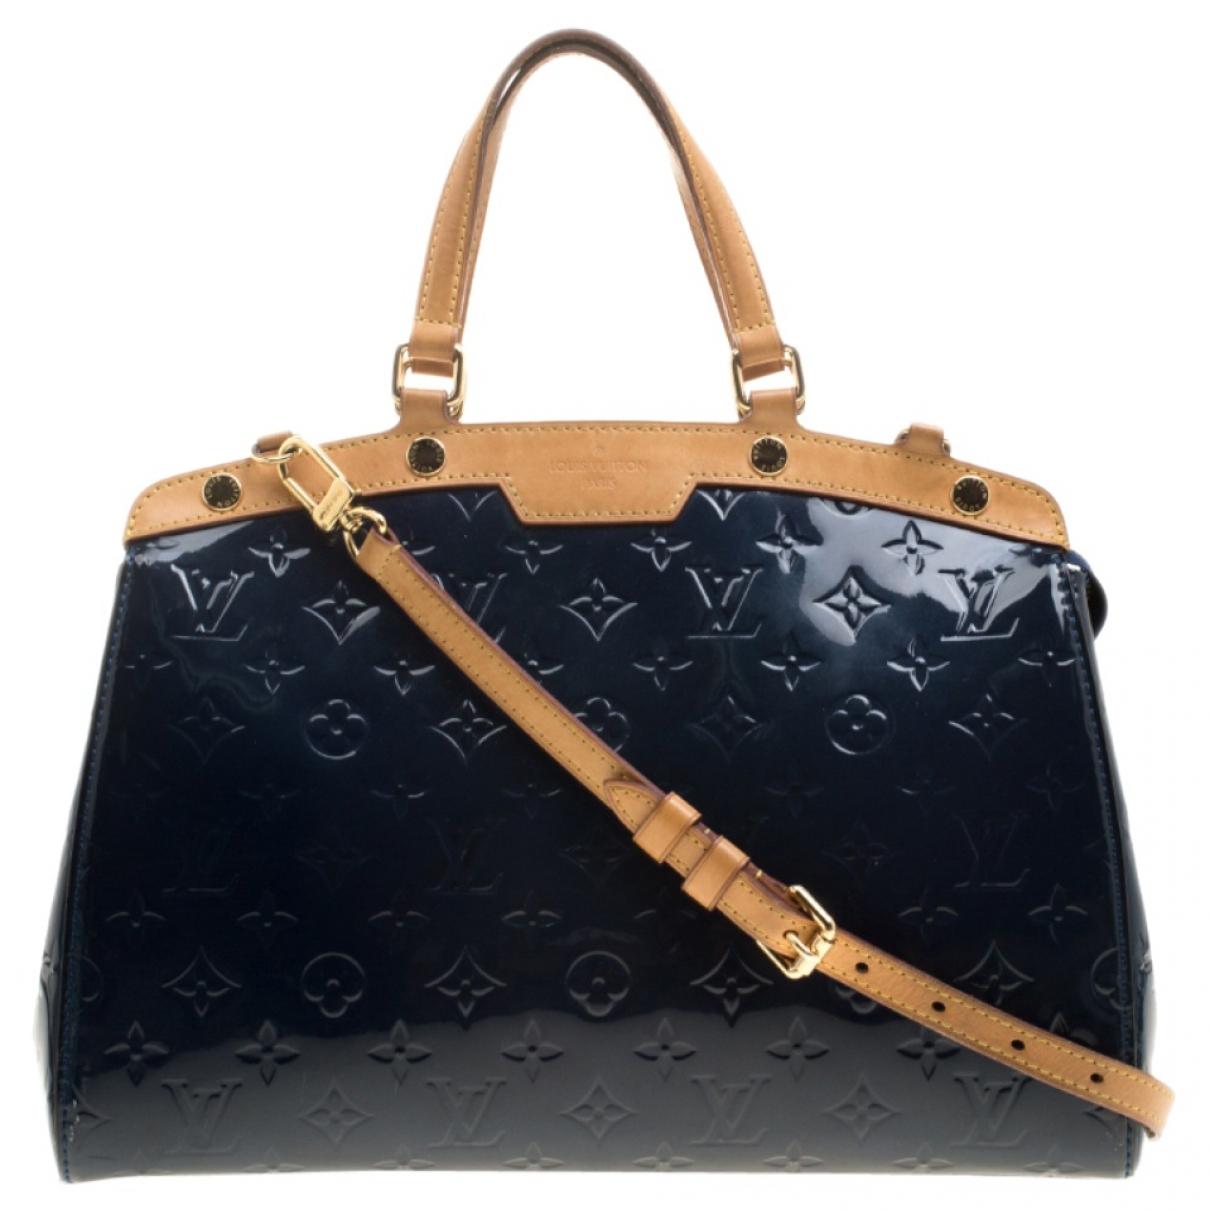 Louis Vuitton Patent Leather Bags Keweenaw Bay Indian Community